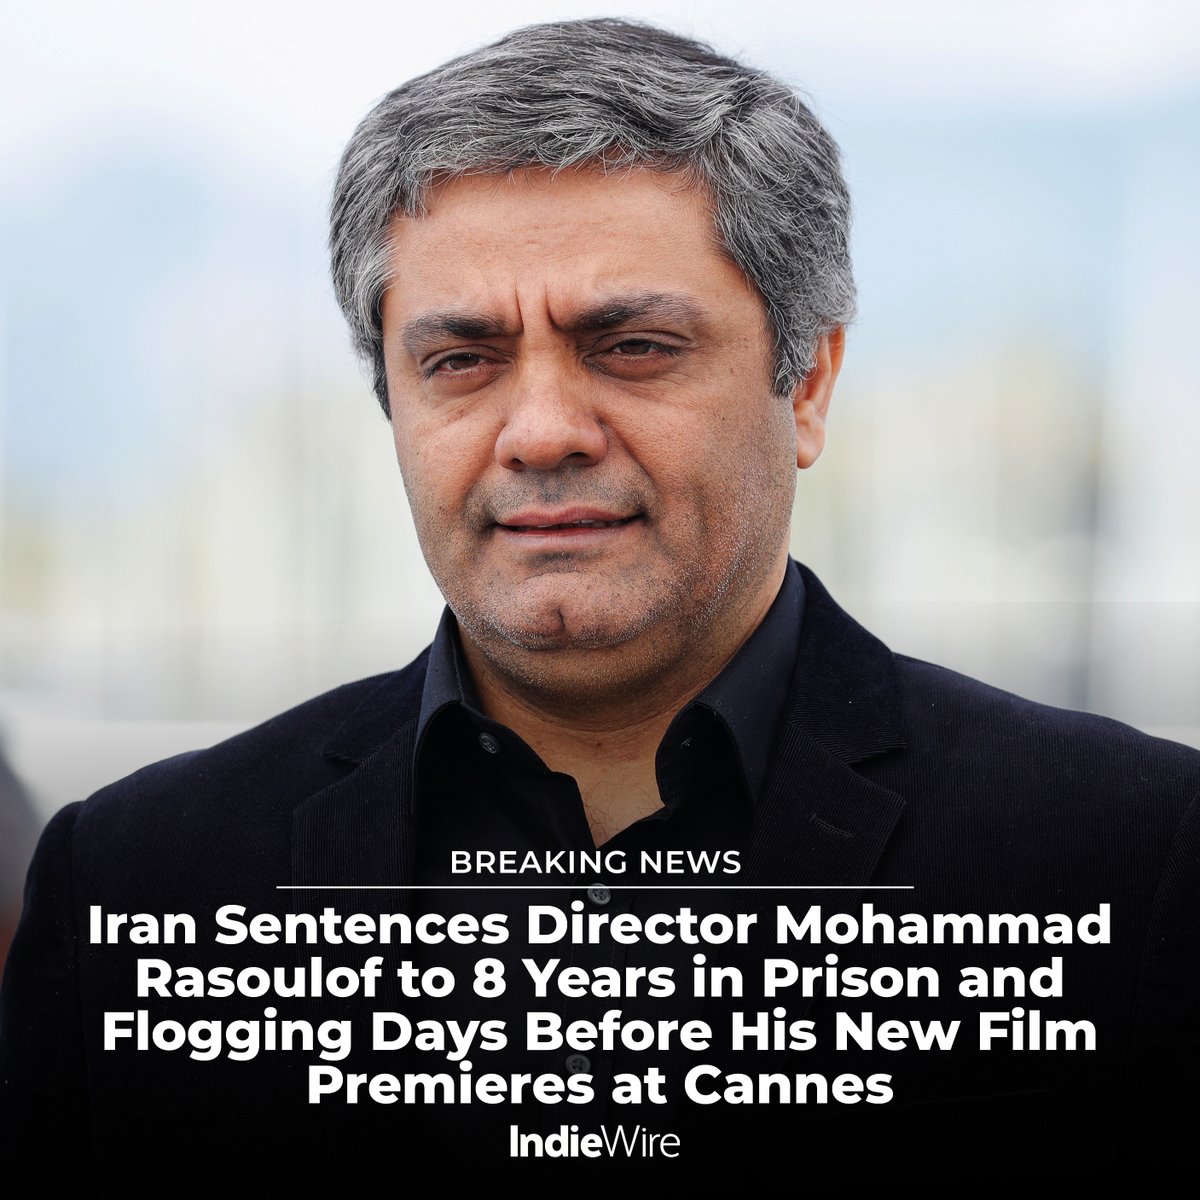 We are horrified by the news of Mohammad Rasoulof's cruel sentencing at the hands of Iran’s hardline government. We are proud to have distributed his films There Is No Evil and Manuscripts Don't Burn, both of which demonstrate incredible artistic bravery. We strongly denounce…